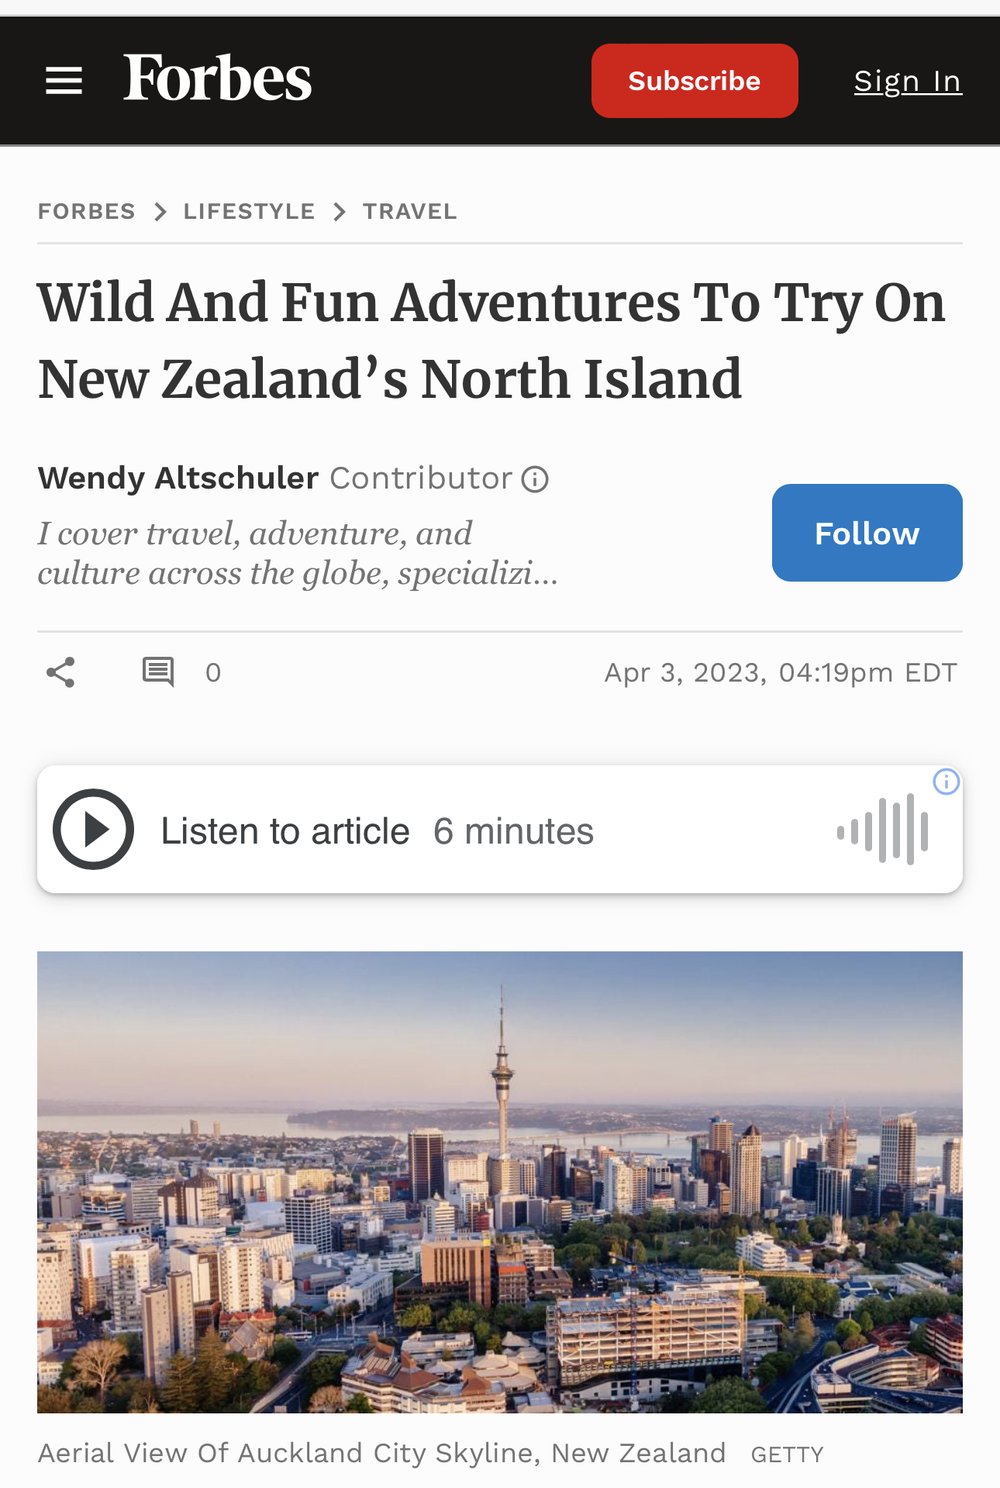 Wild And Fun Adventures To Try On New Zealand’s North Island